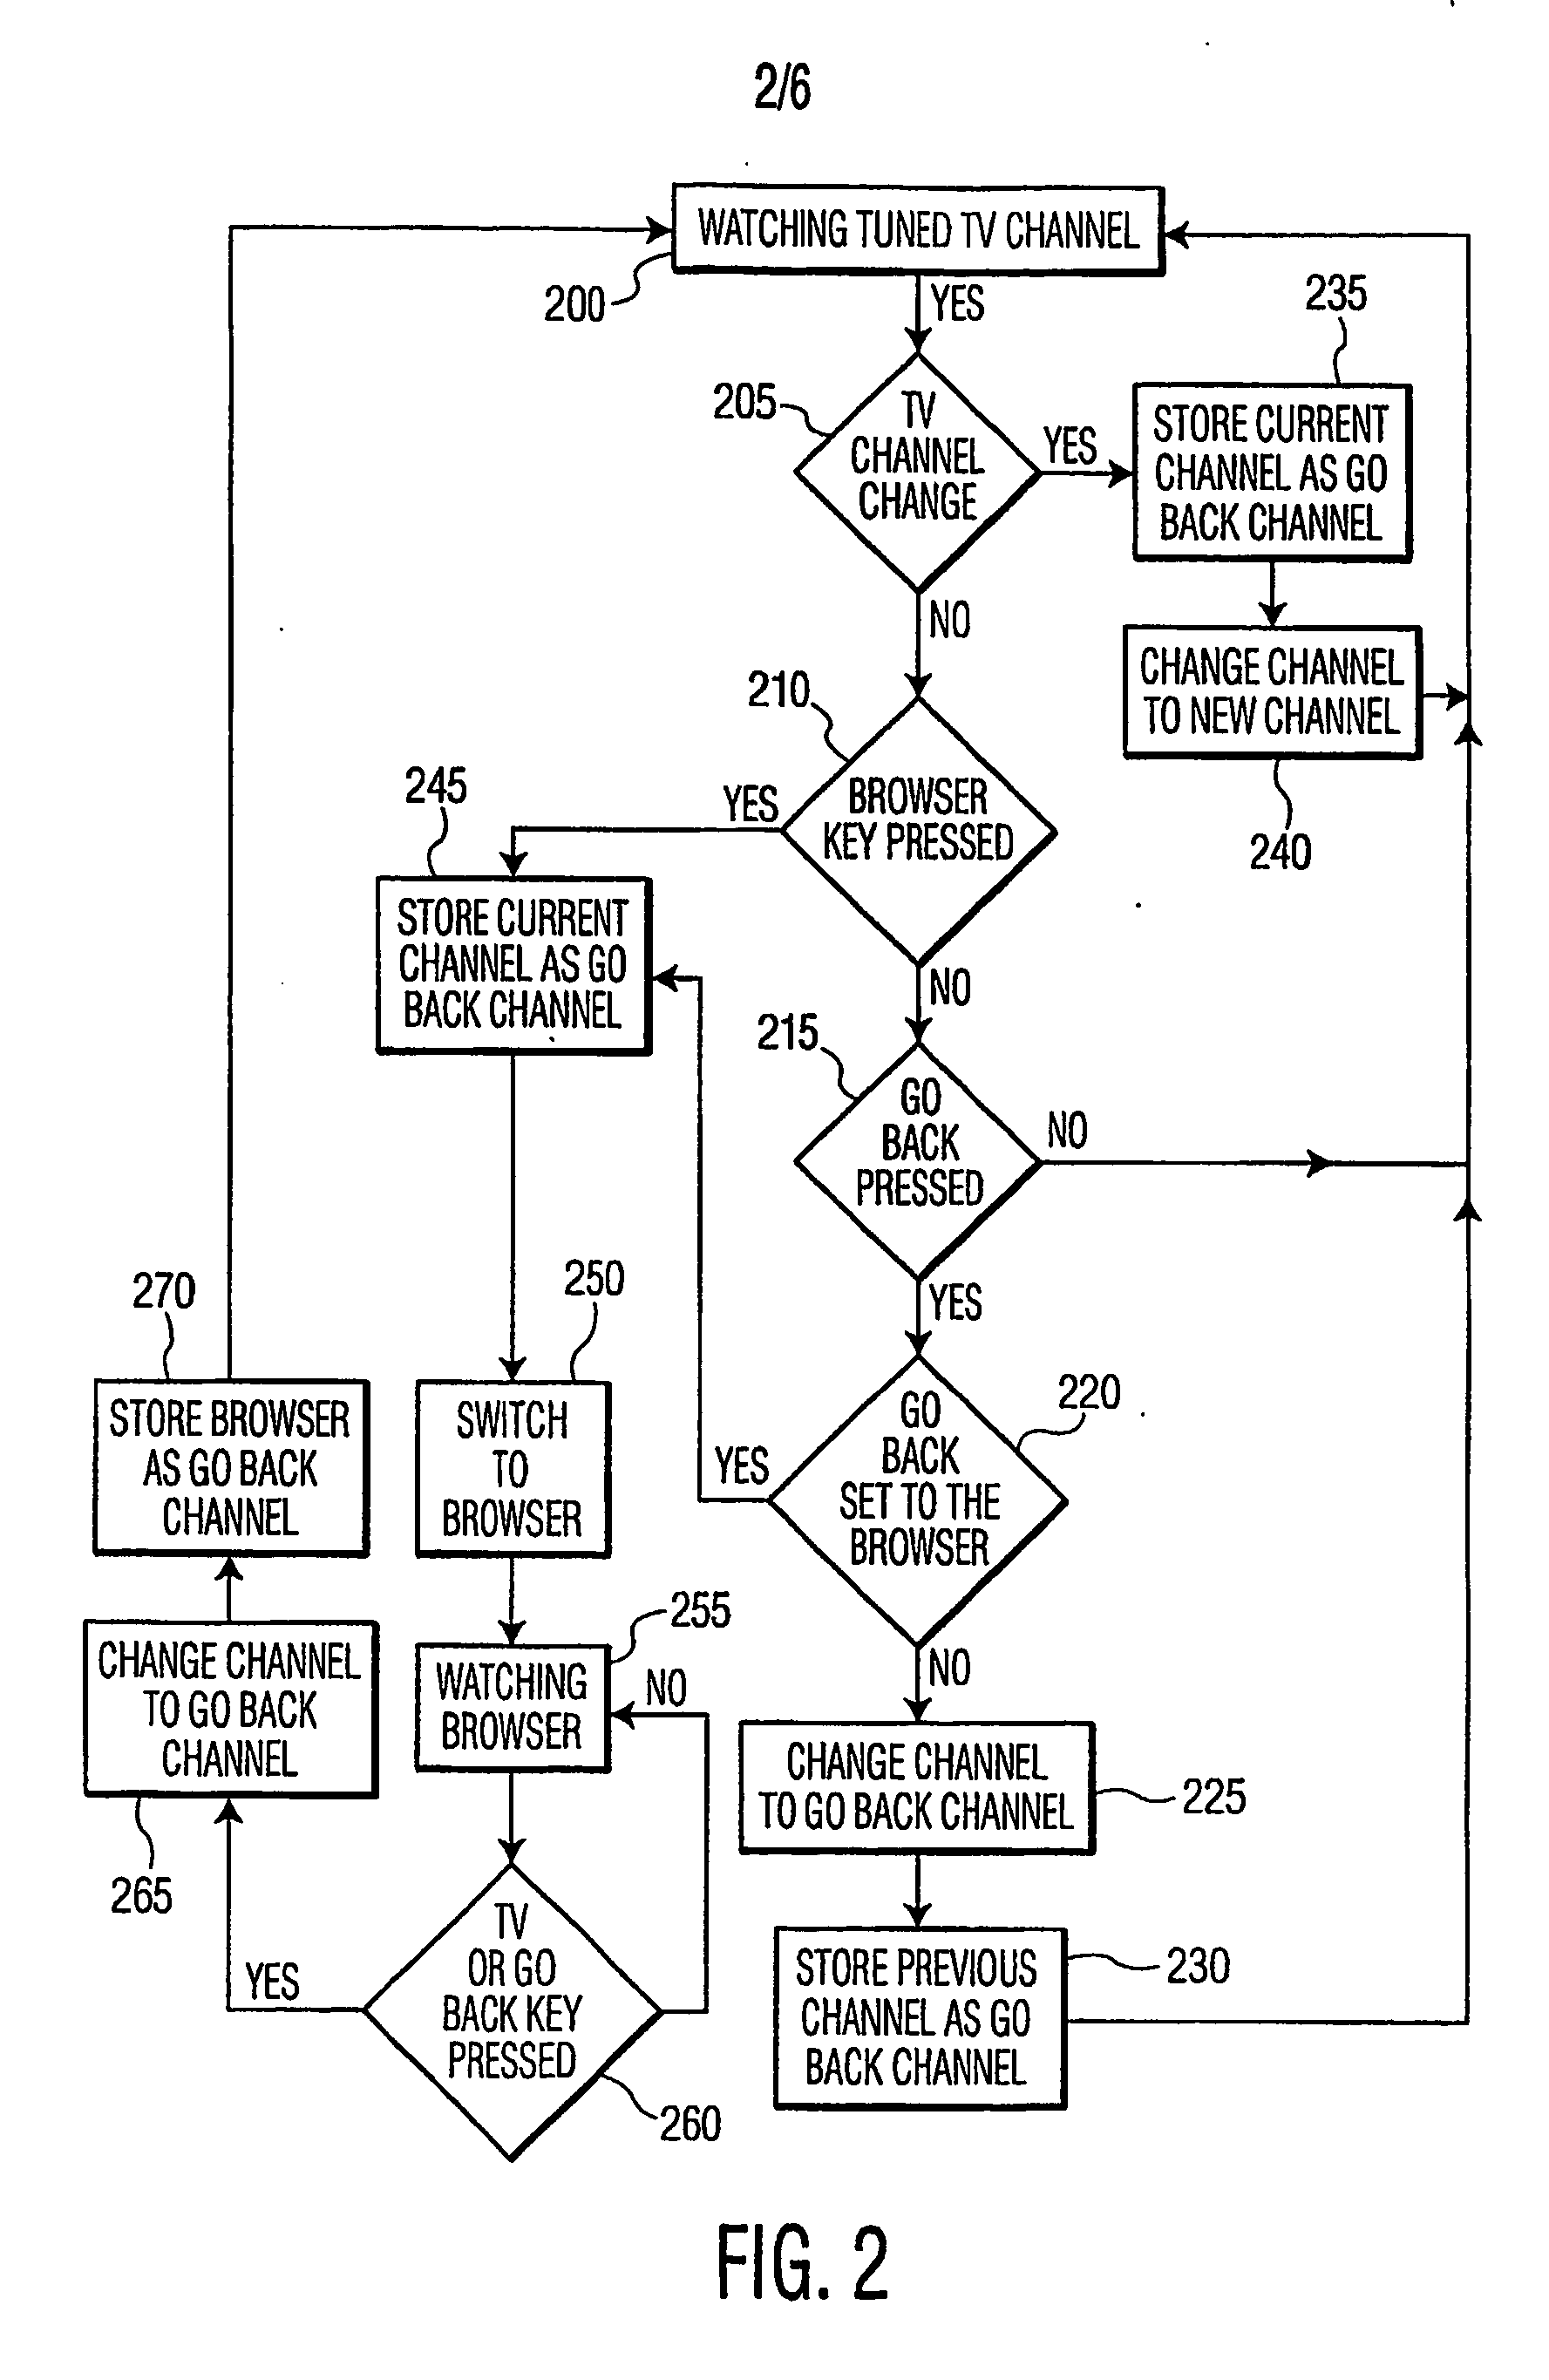 Apparatus and method for switching between an interactive mode and a television program mode